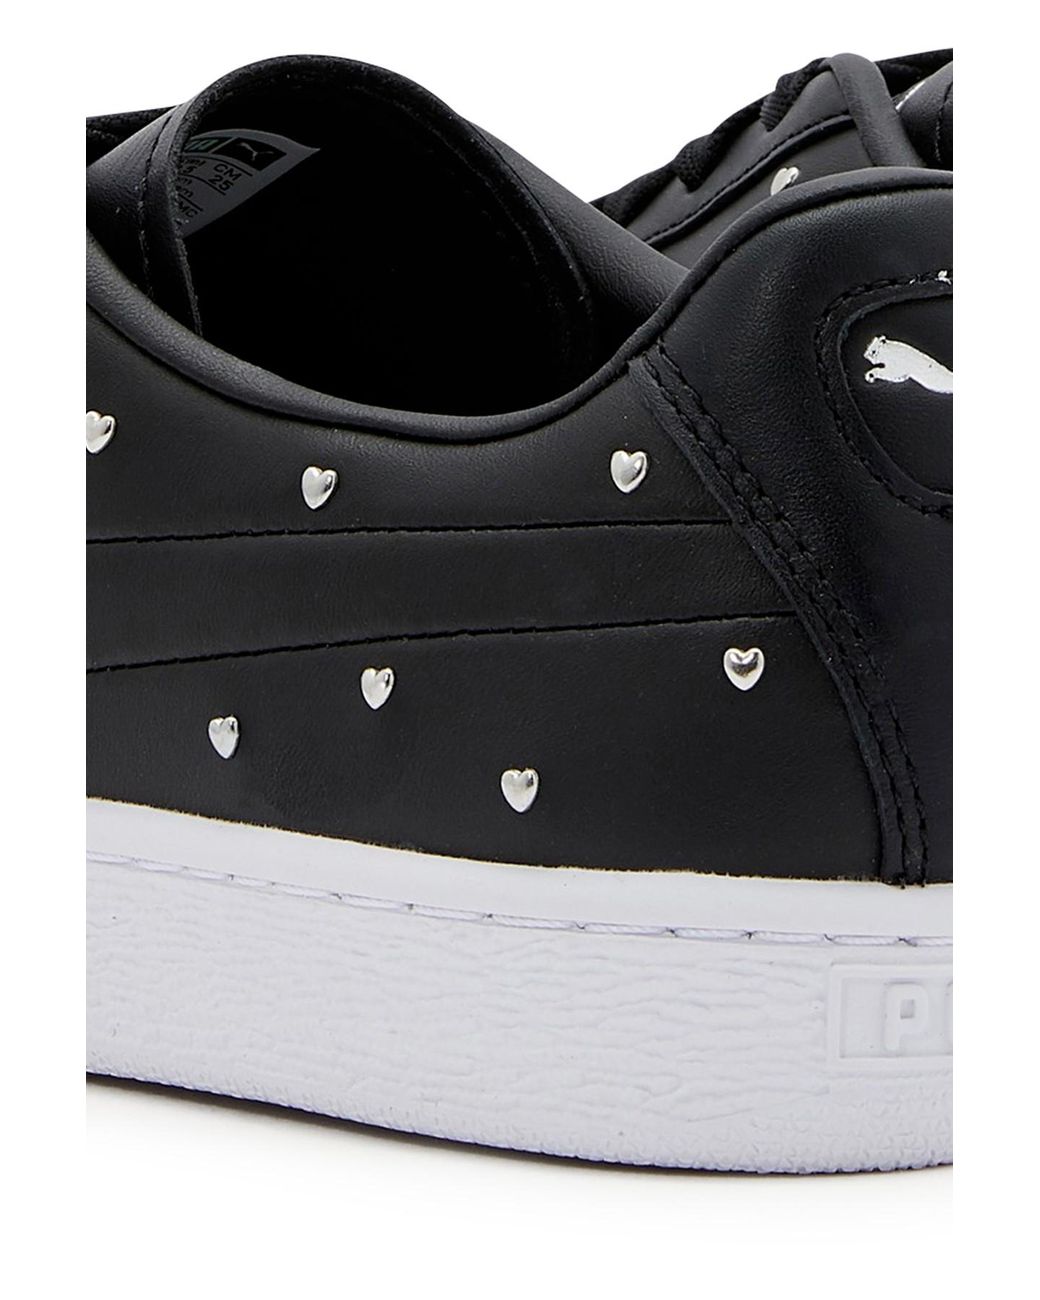 puma studded sneakers